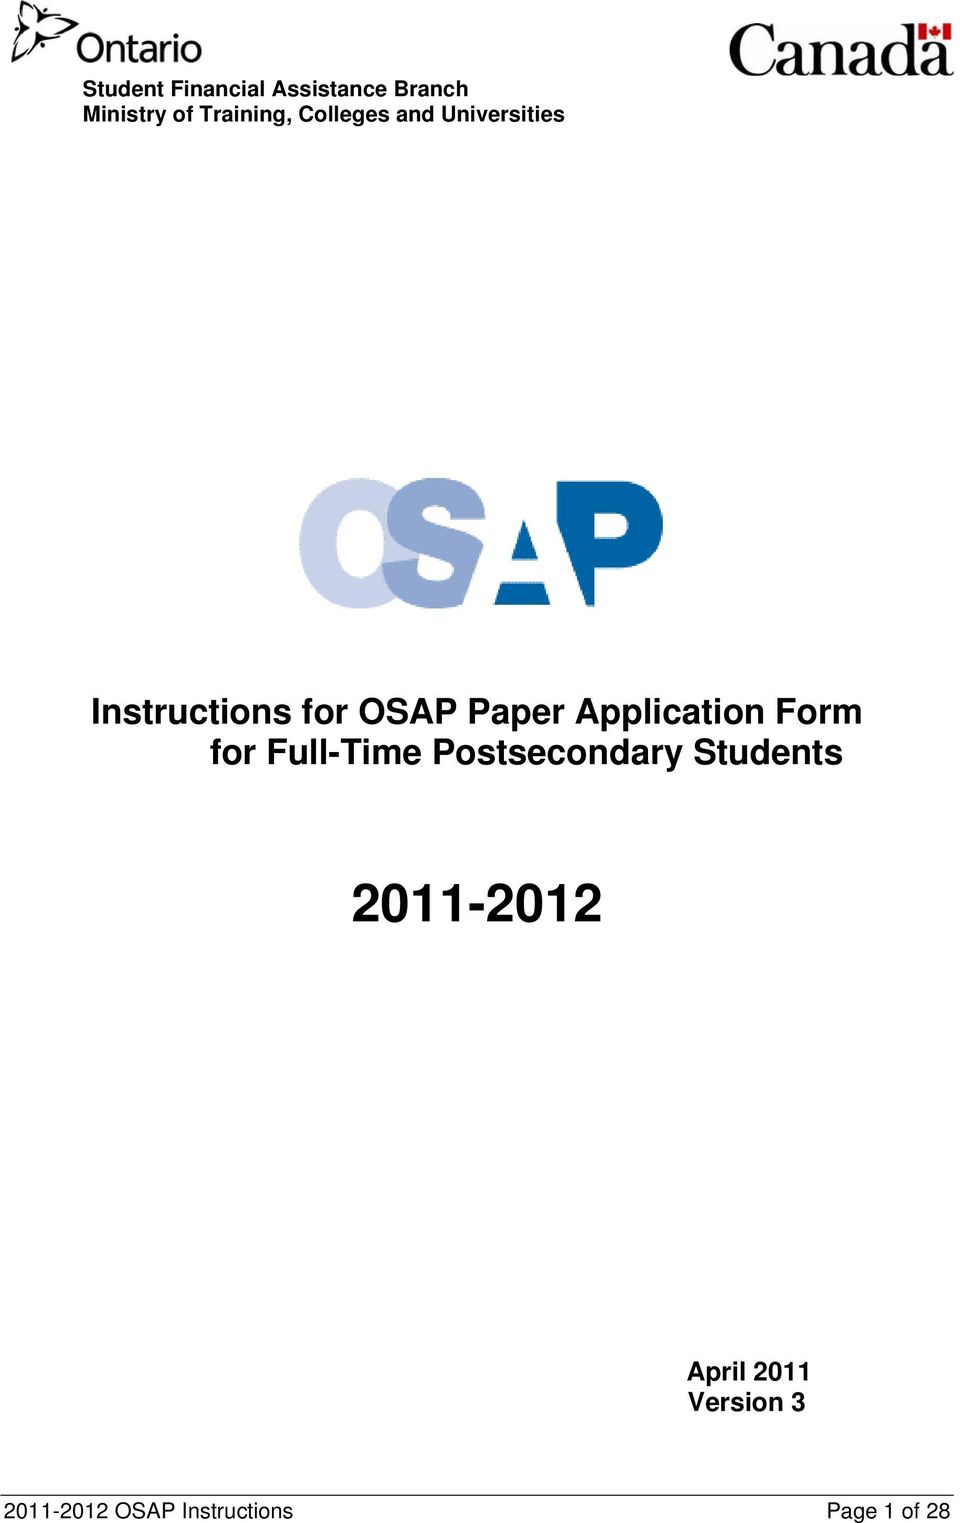 Application Form for Full-Time Postsecondary Students